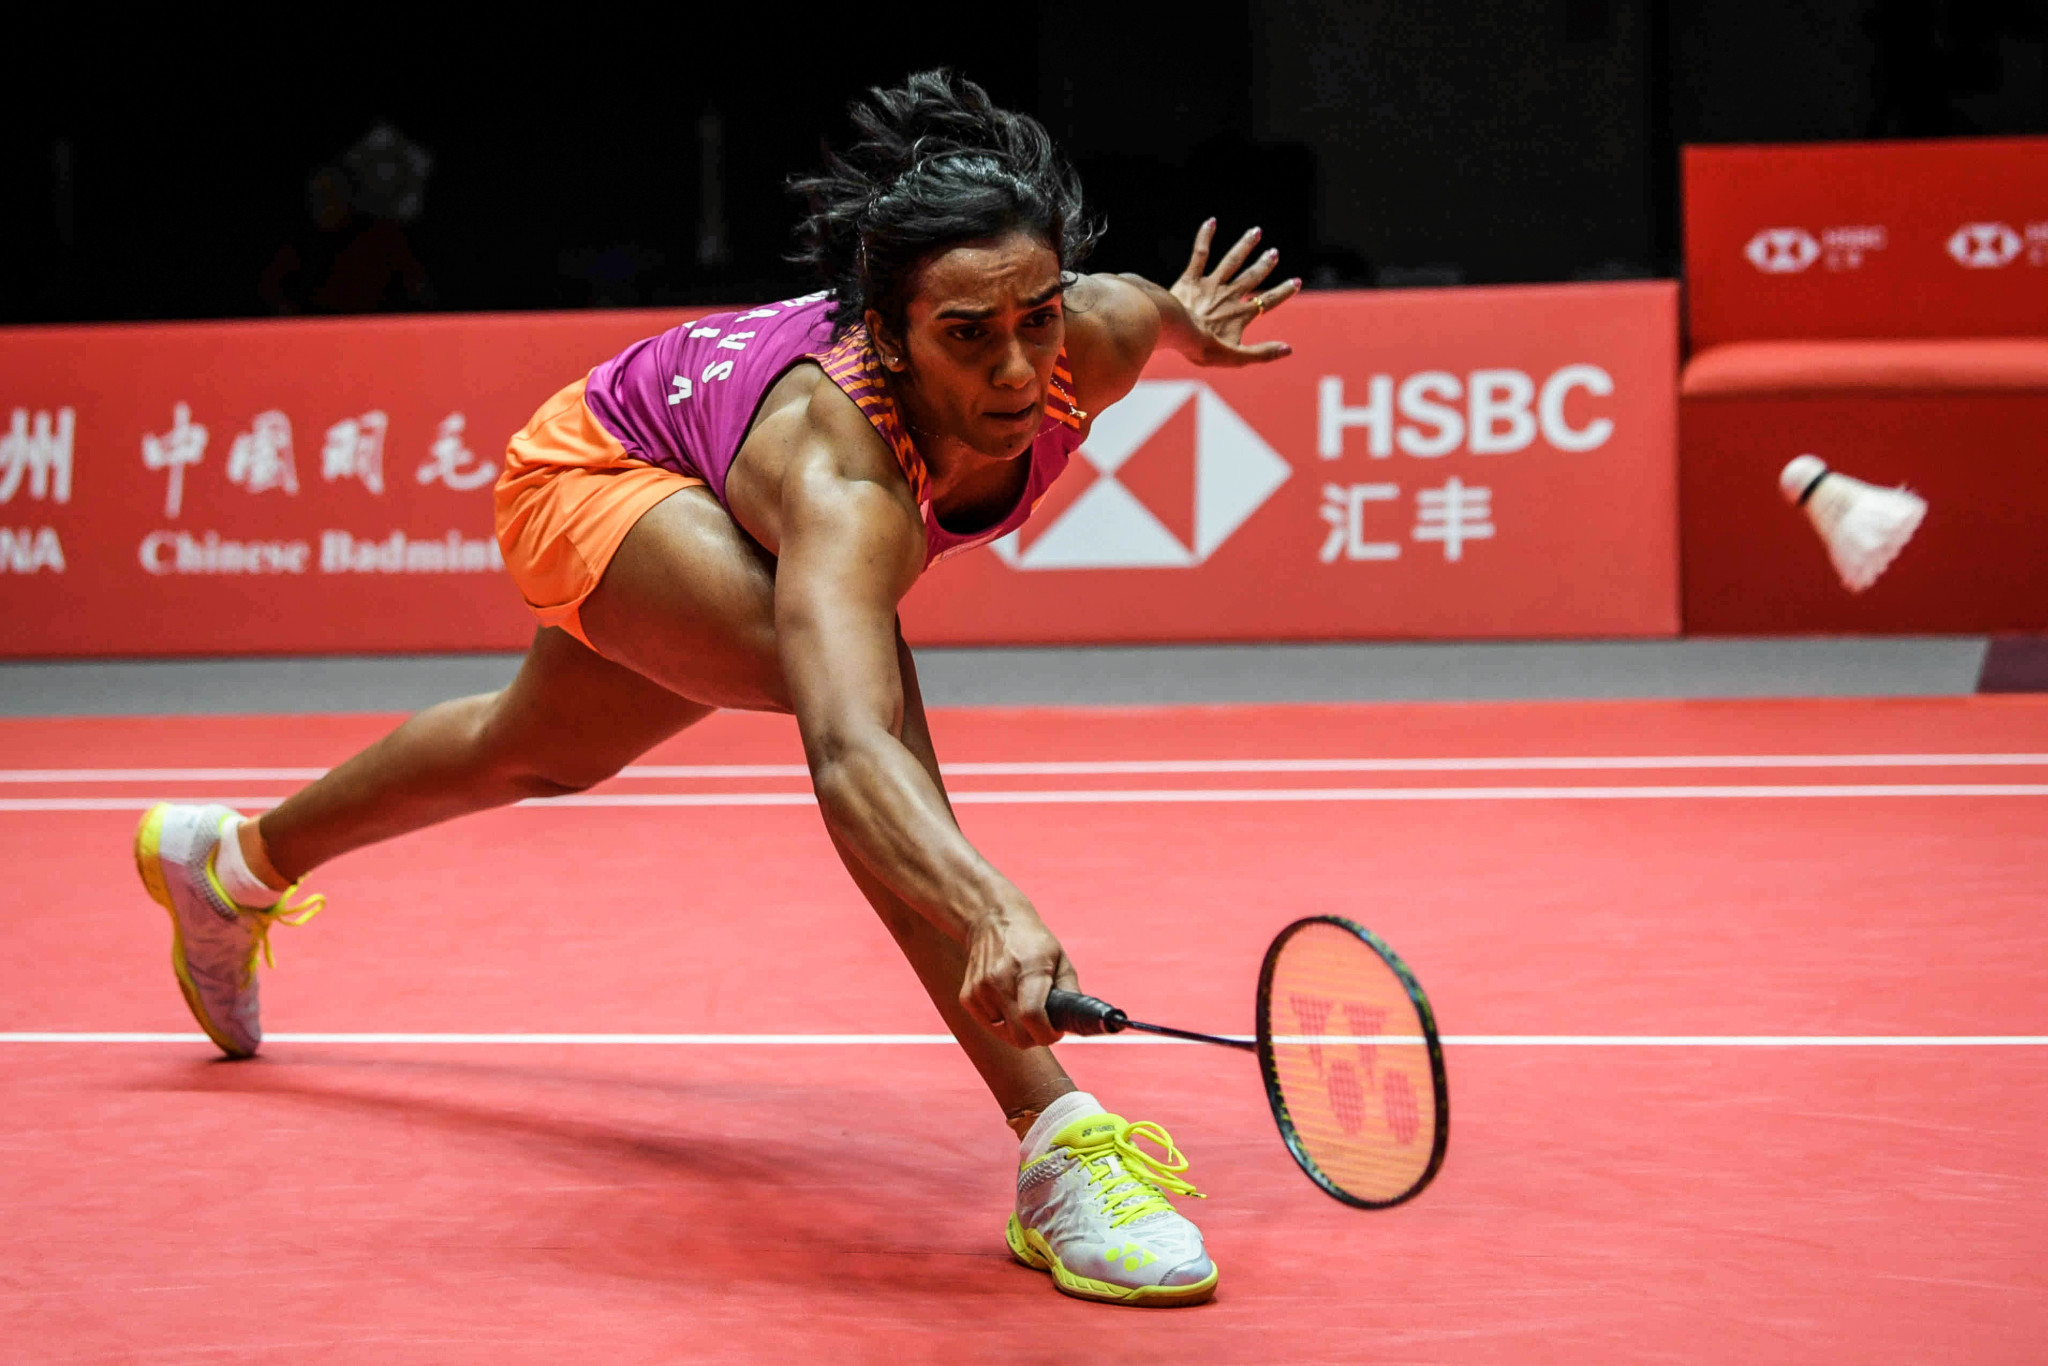 PV Sindhu ensured there is also Indian interest in the women's event ©Getty Images